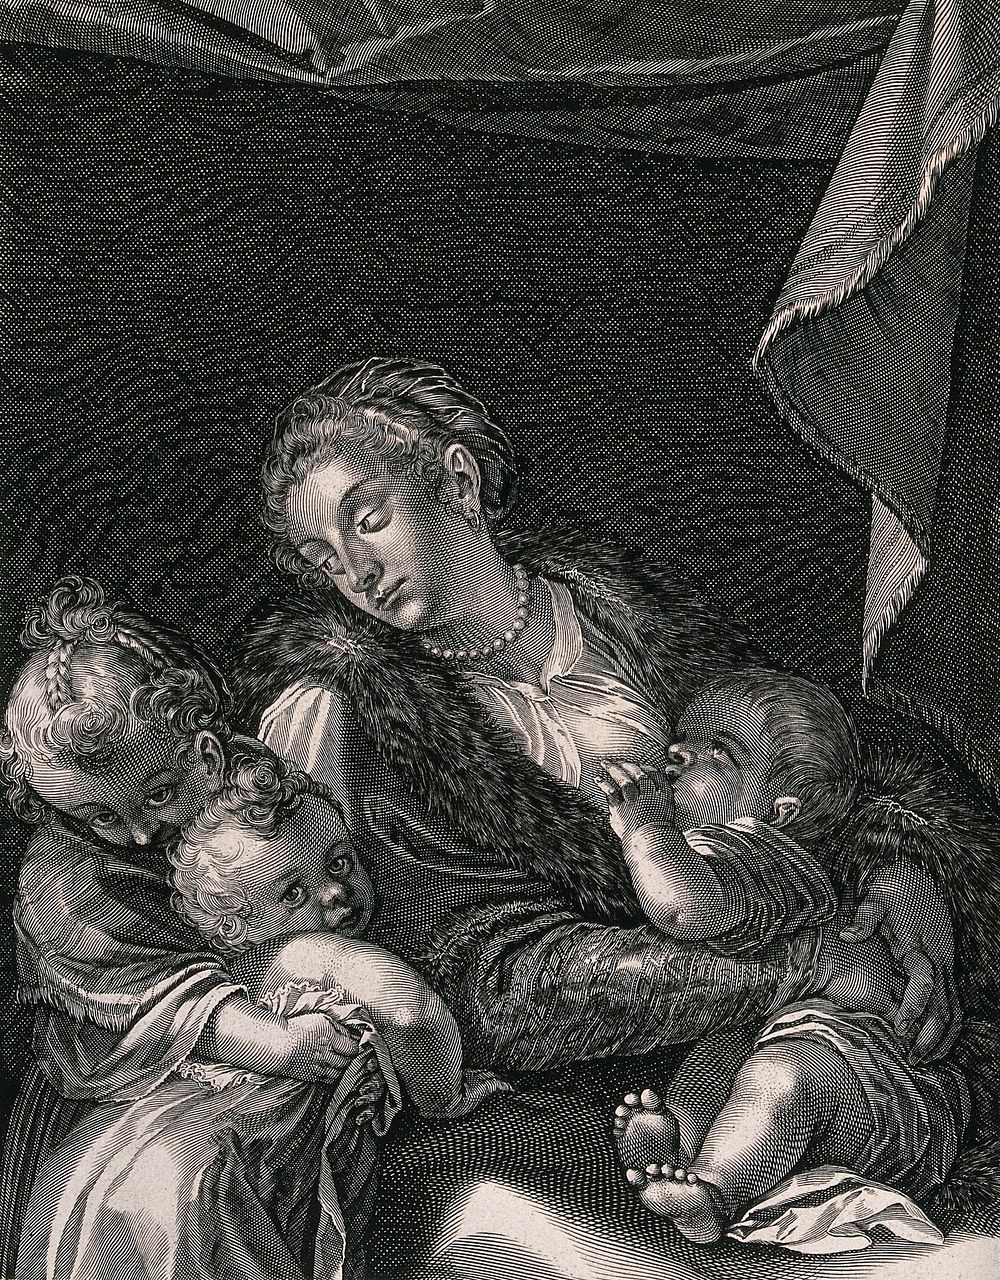 While a mother feeds her baby two other children are clinging to her side. Engraving by Aegidius Sadeler.